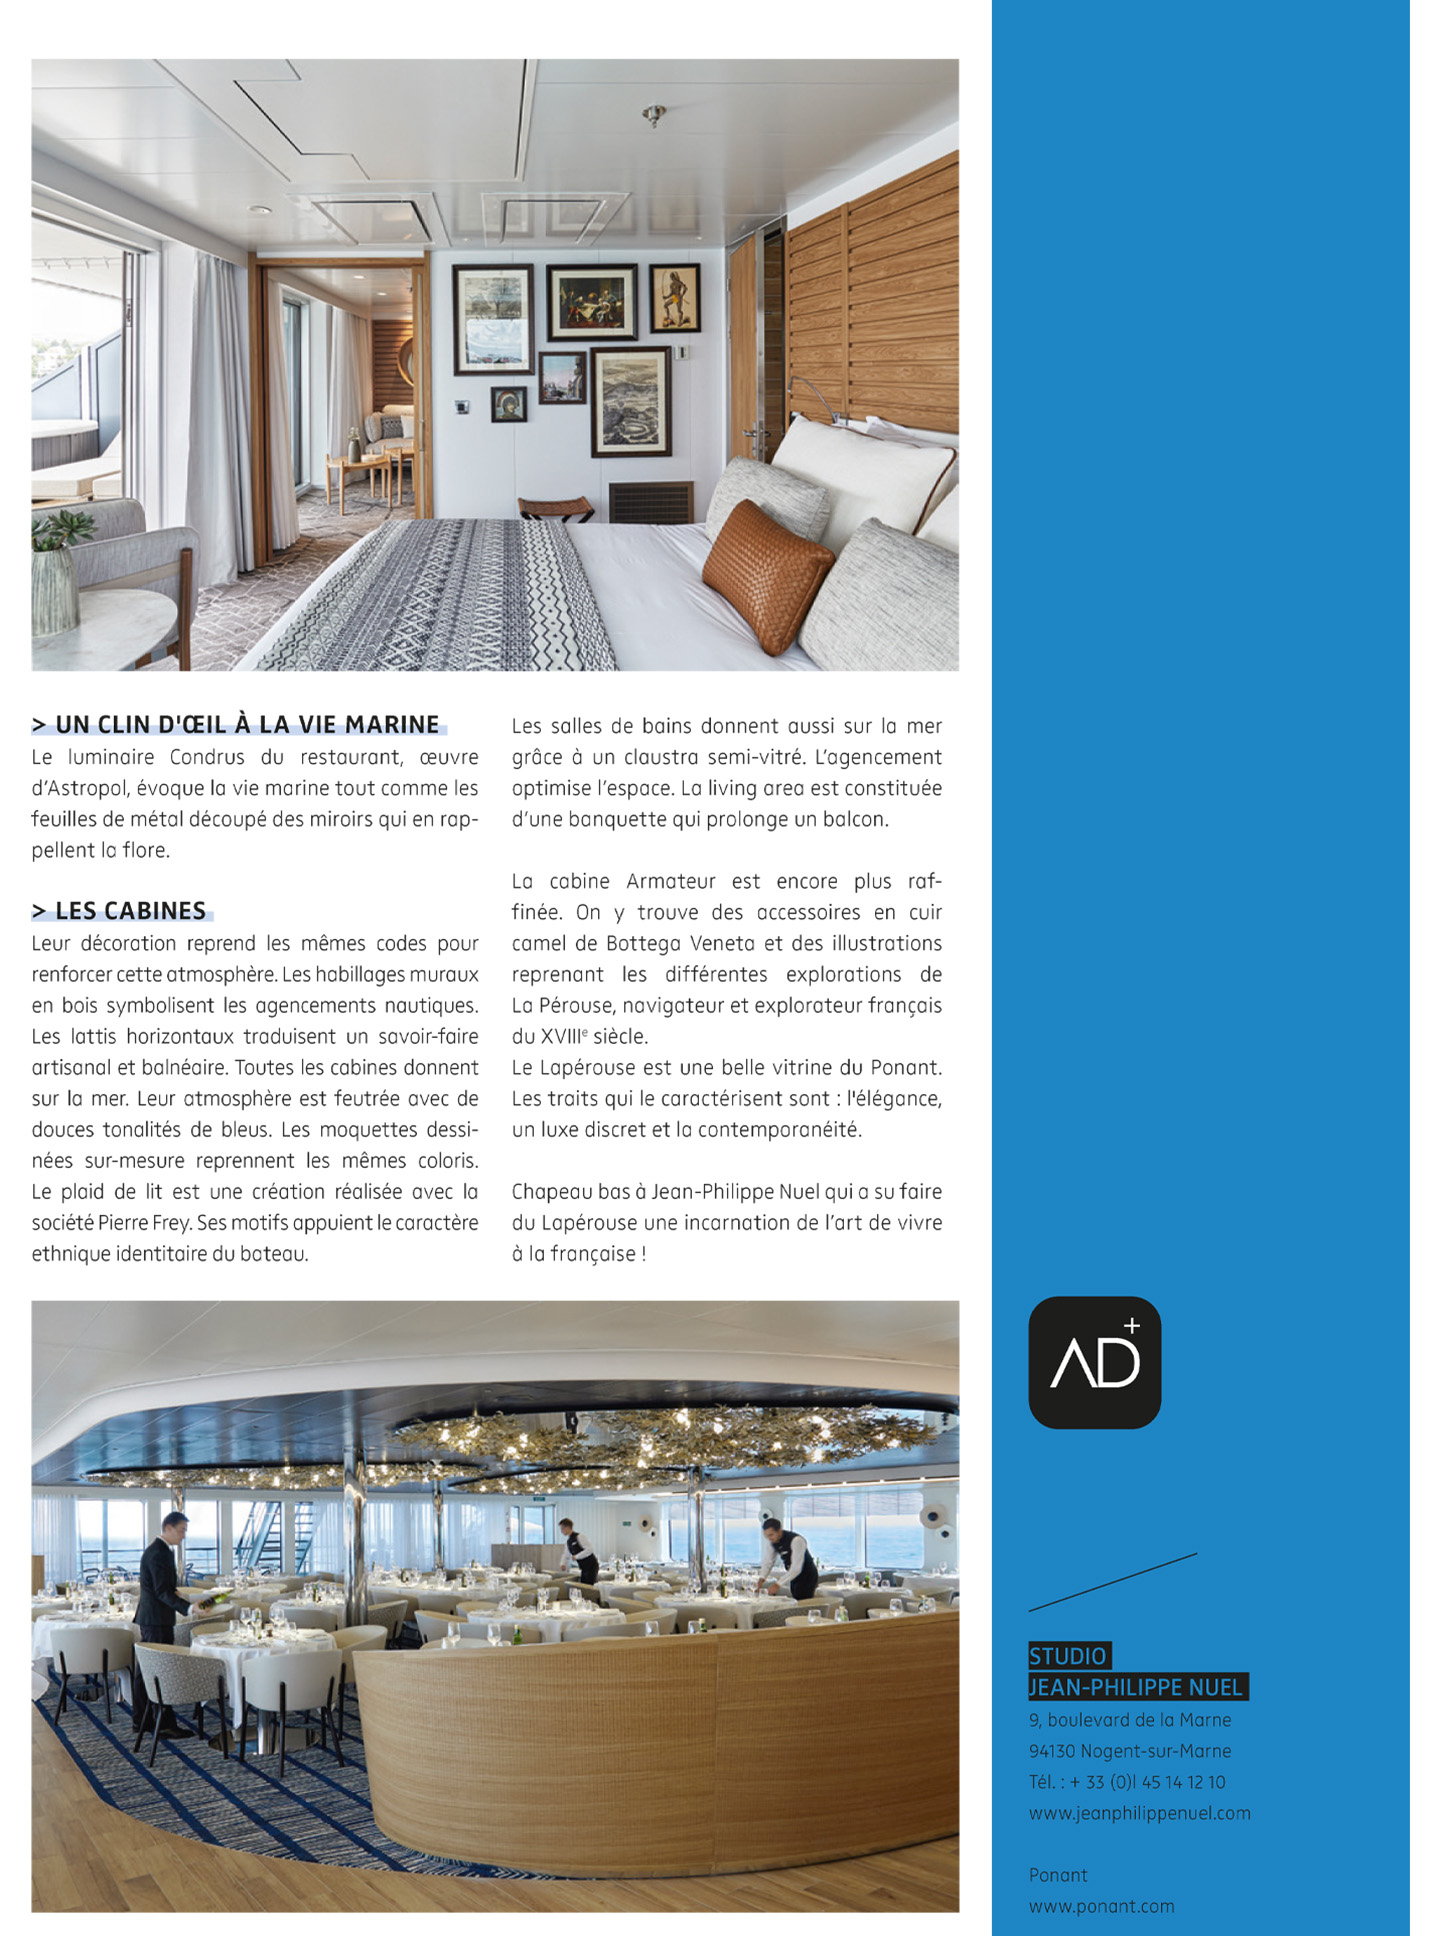 Article on the Champlain Ponant Explorers realized by the studio jean-Philippe Nuel in the magazine NDA, luxury cruise ship, maritime exploration